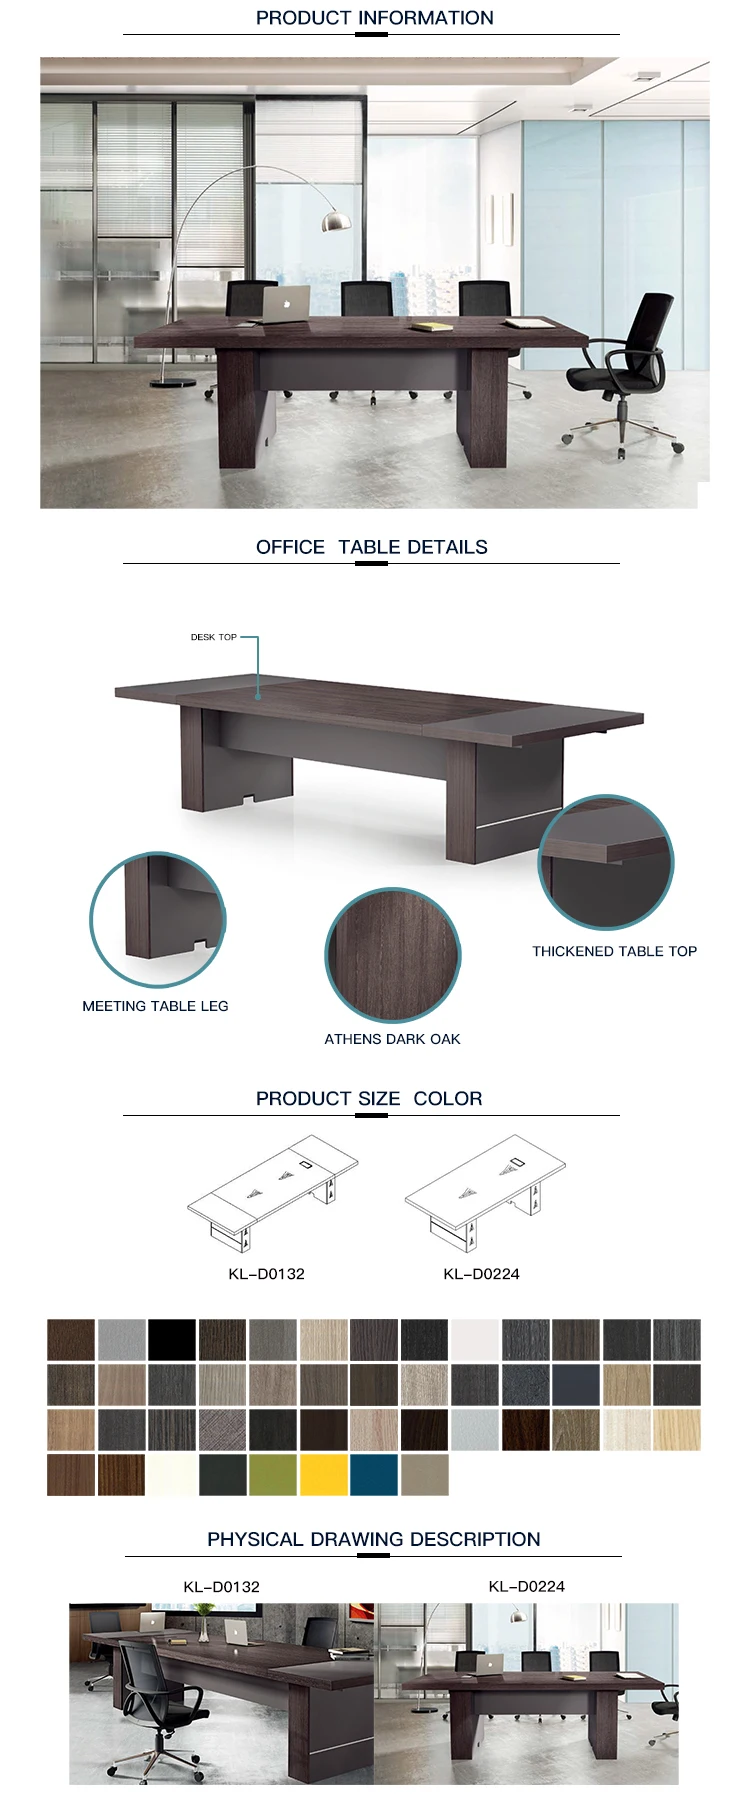 Dious factory luxury conference table meeting table for office and hotel and school